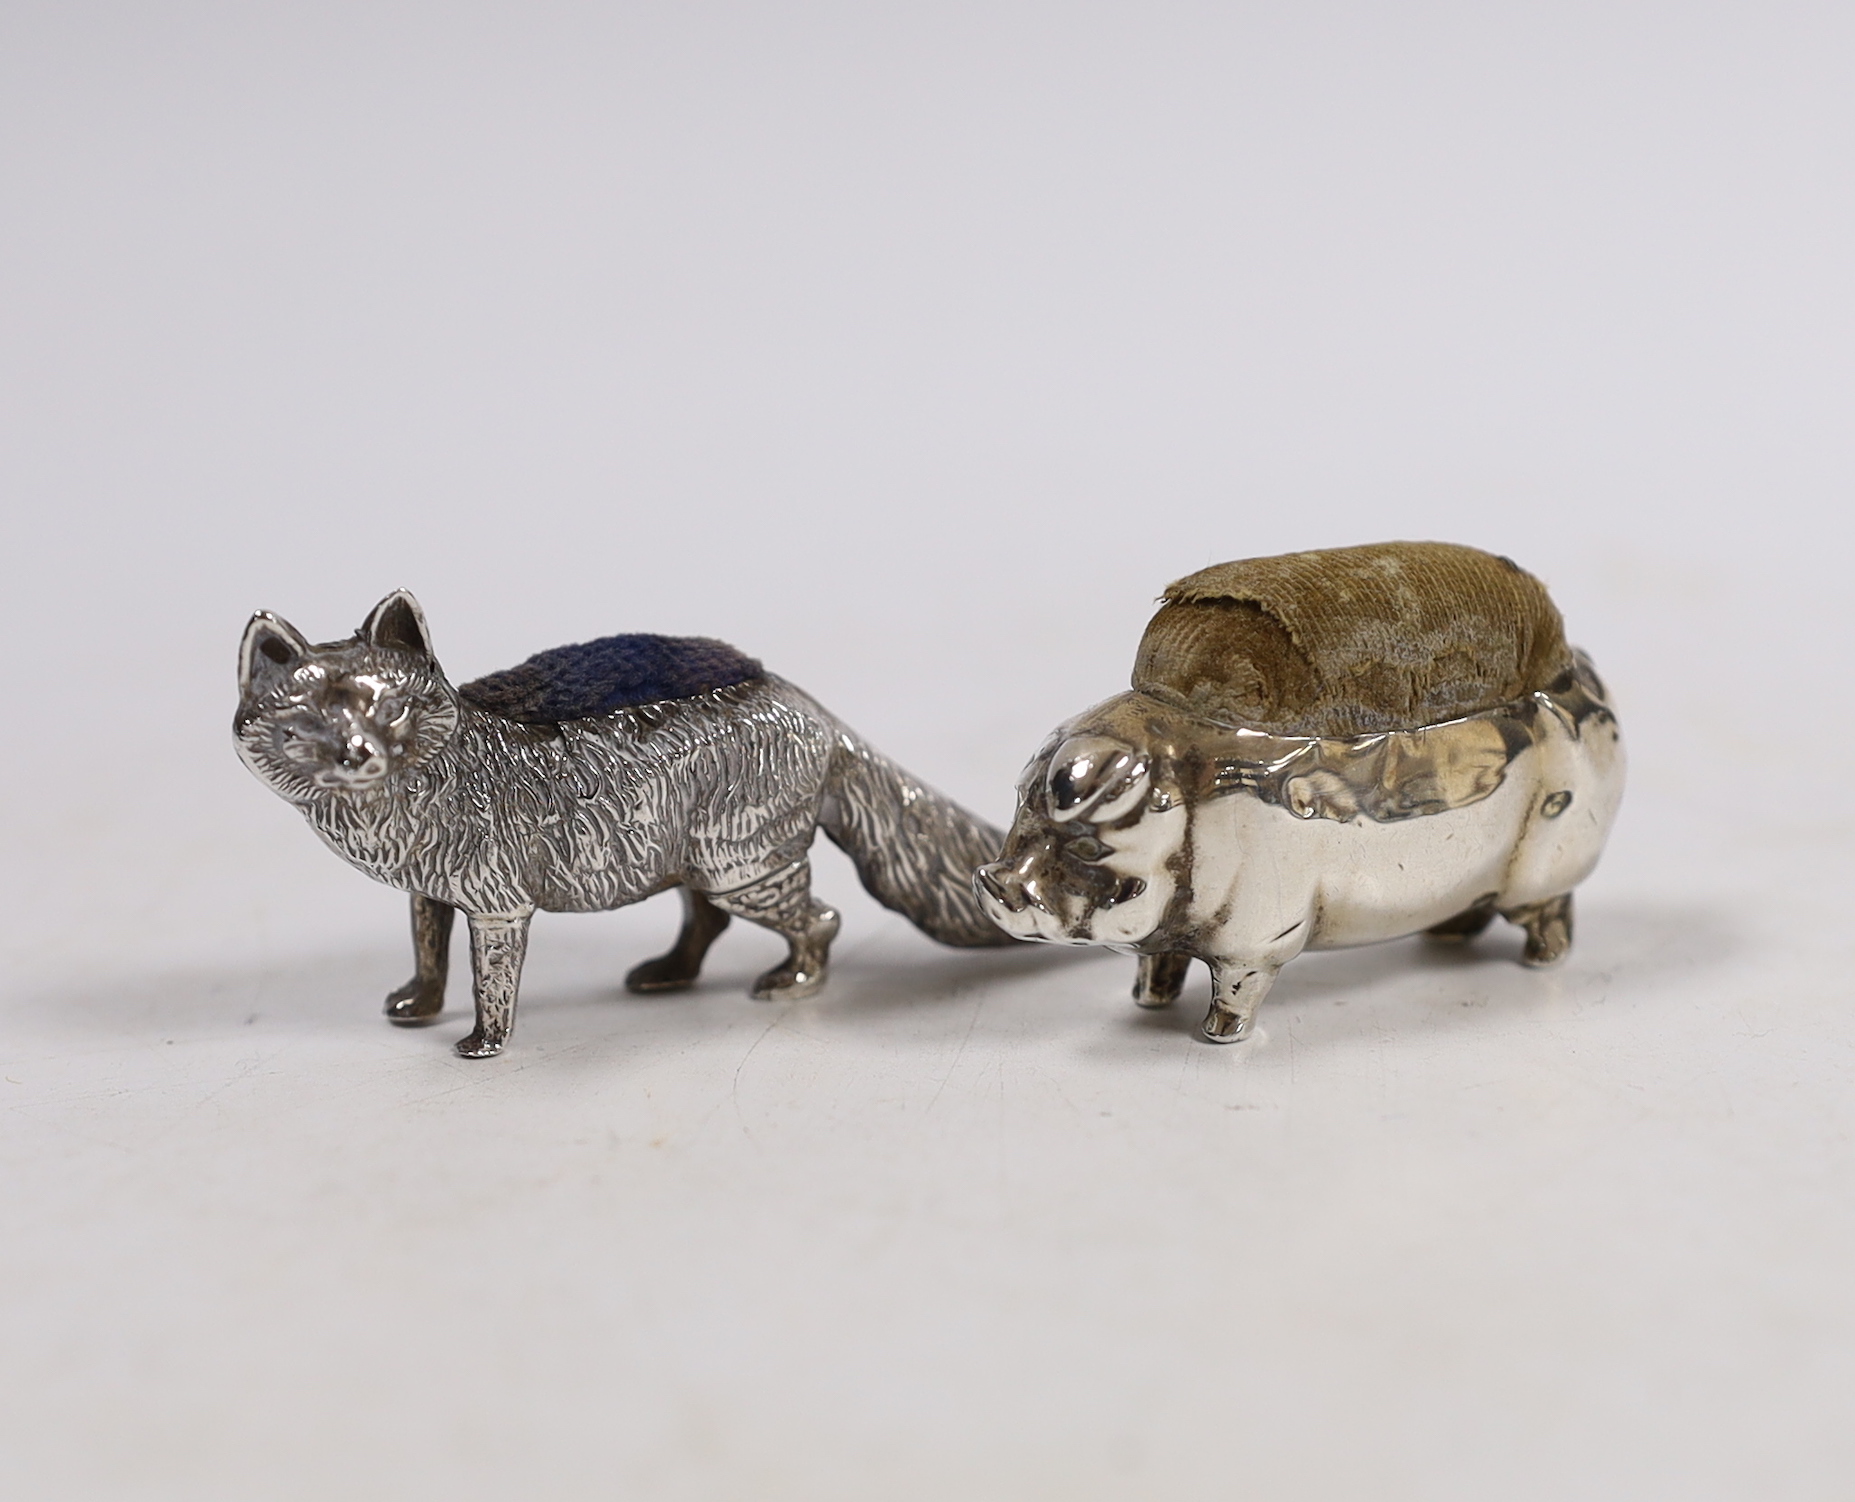 Two early 20th century novelty silver pin cushions, modelled as a fox, Levy & Salaman, Birmingham, 1905, length 60mm and a pig, same maker, marks rubbed.